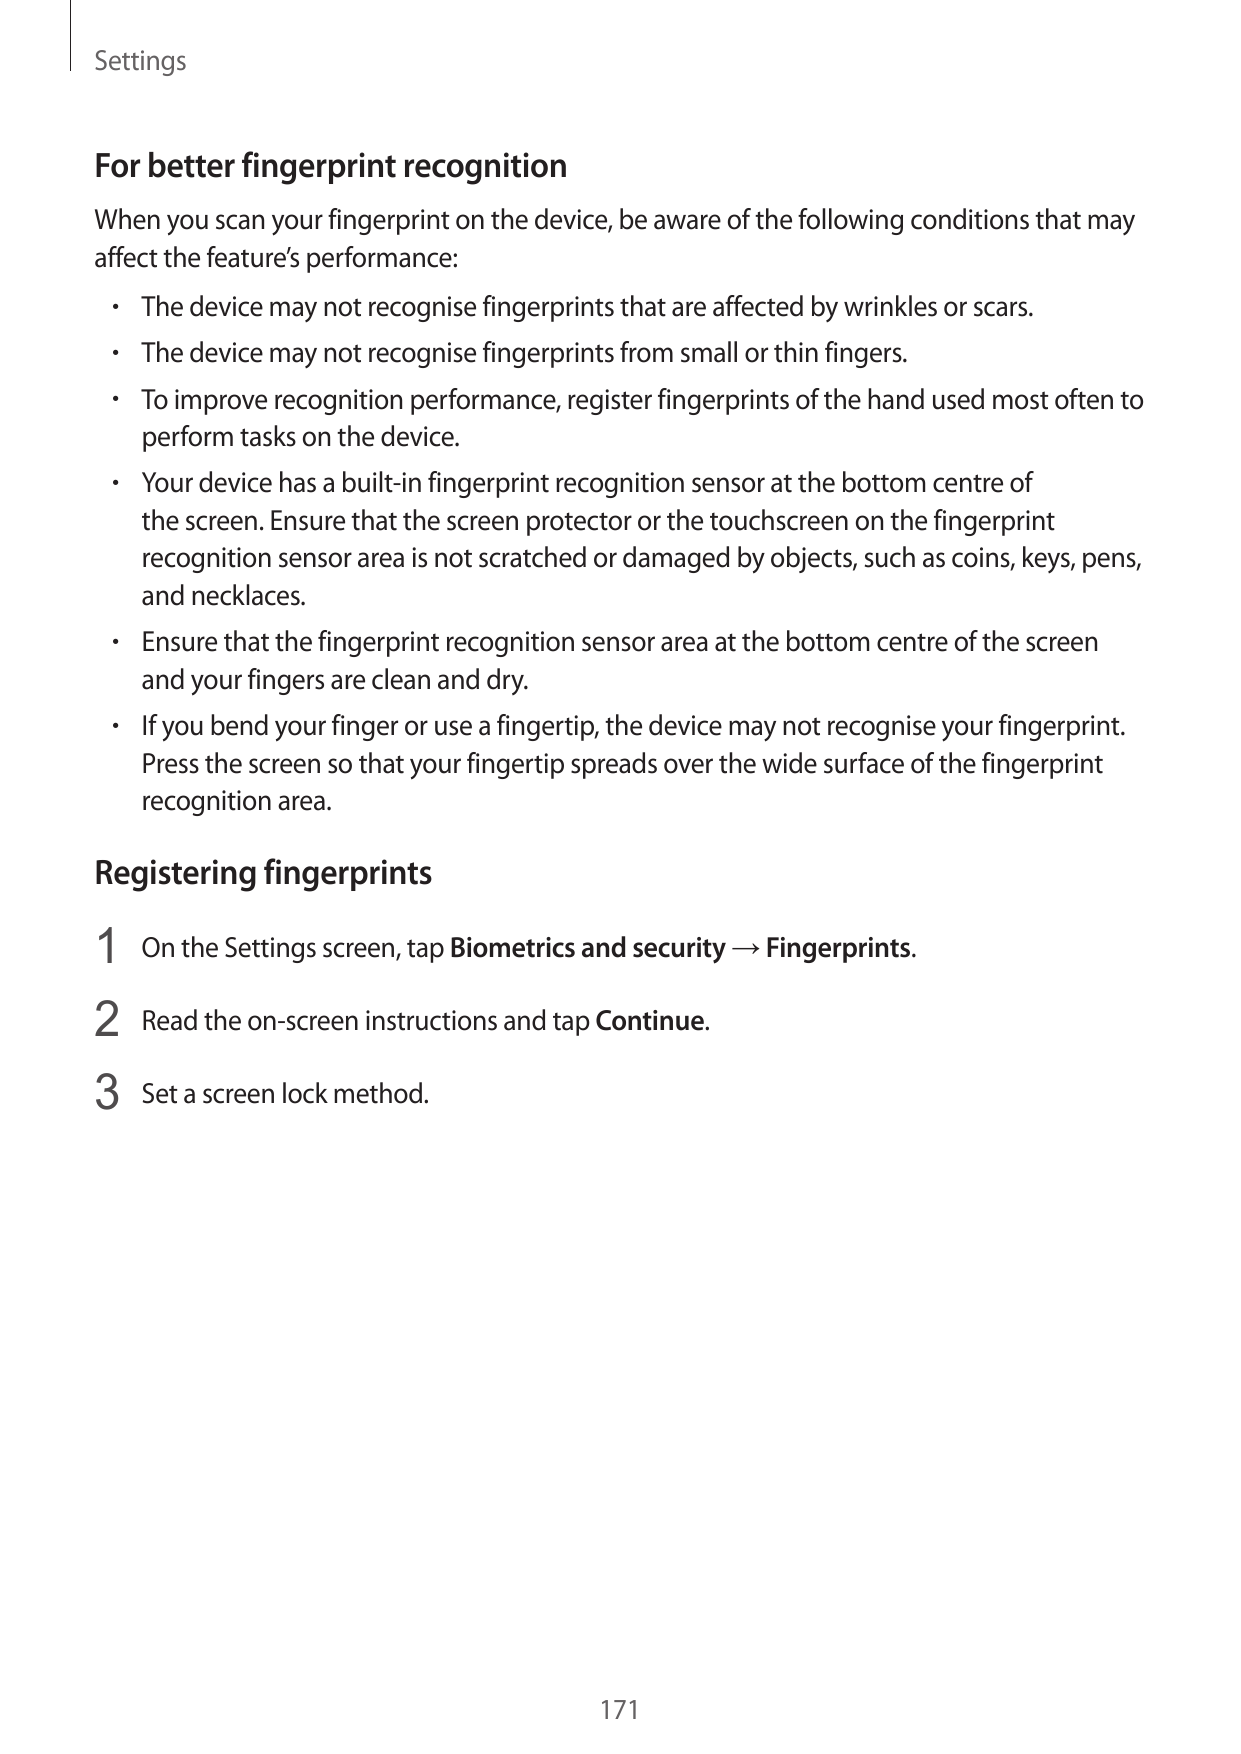 SettingsFor better fingerprint recognitionWhen you scan your fingerprint on the device, be aware of the following conditions tha